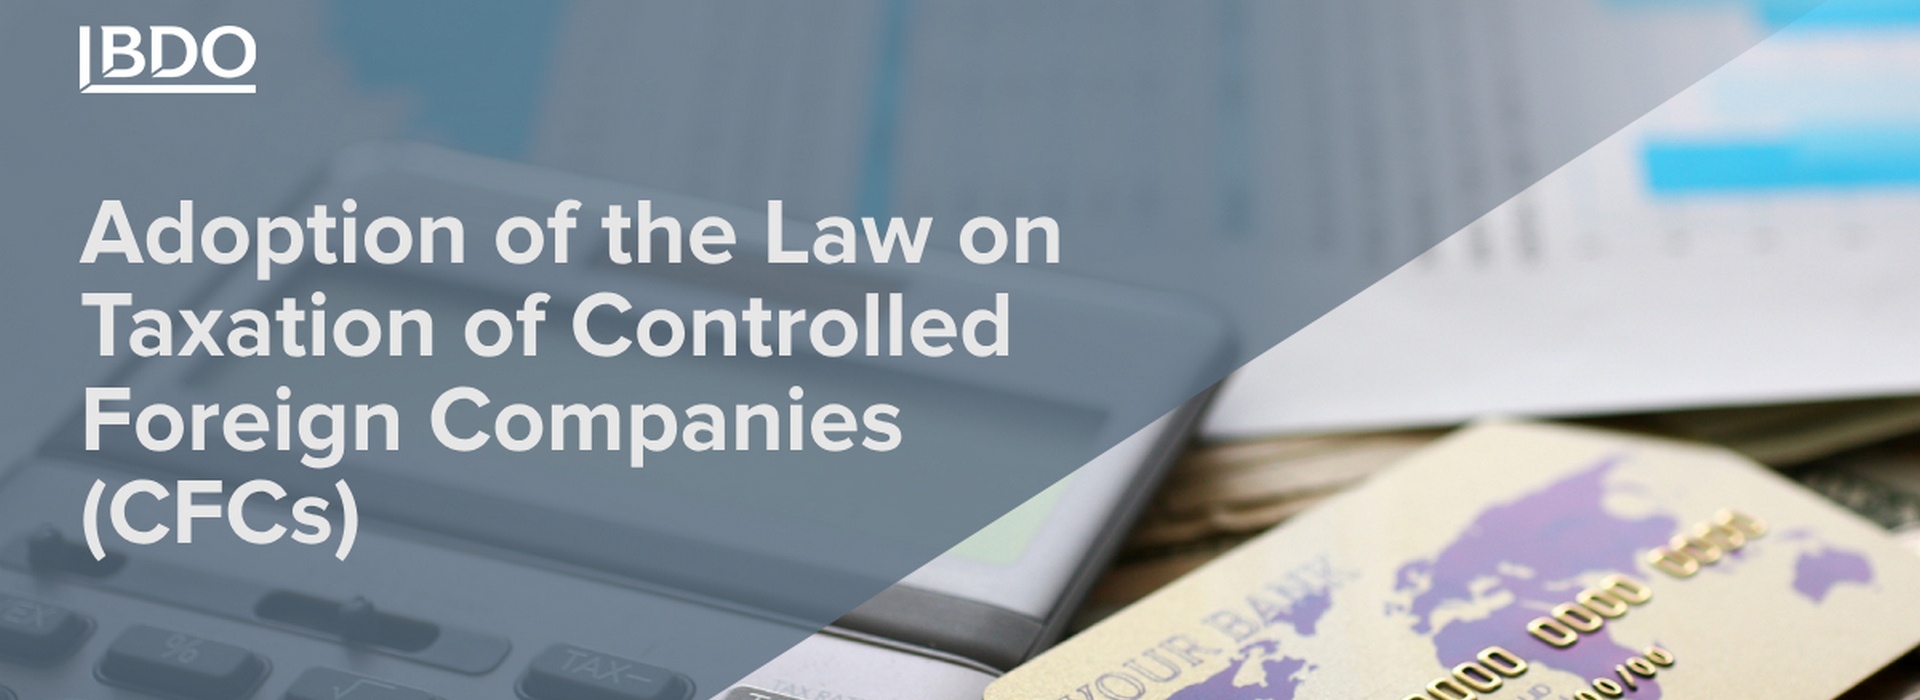 BDO in Ukraine on Adoption of the Law on Taxation of Controlled Foreign Companies (CFCs)